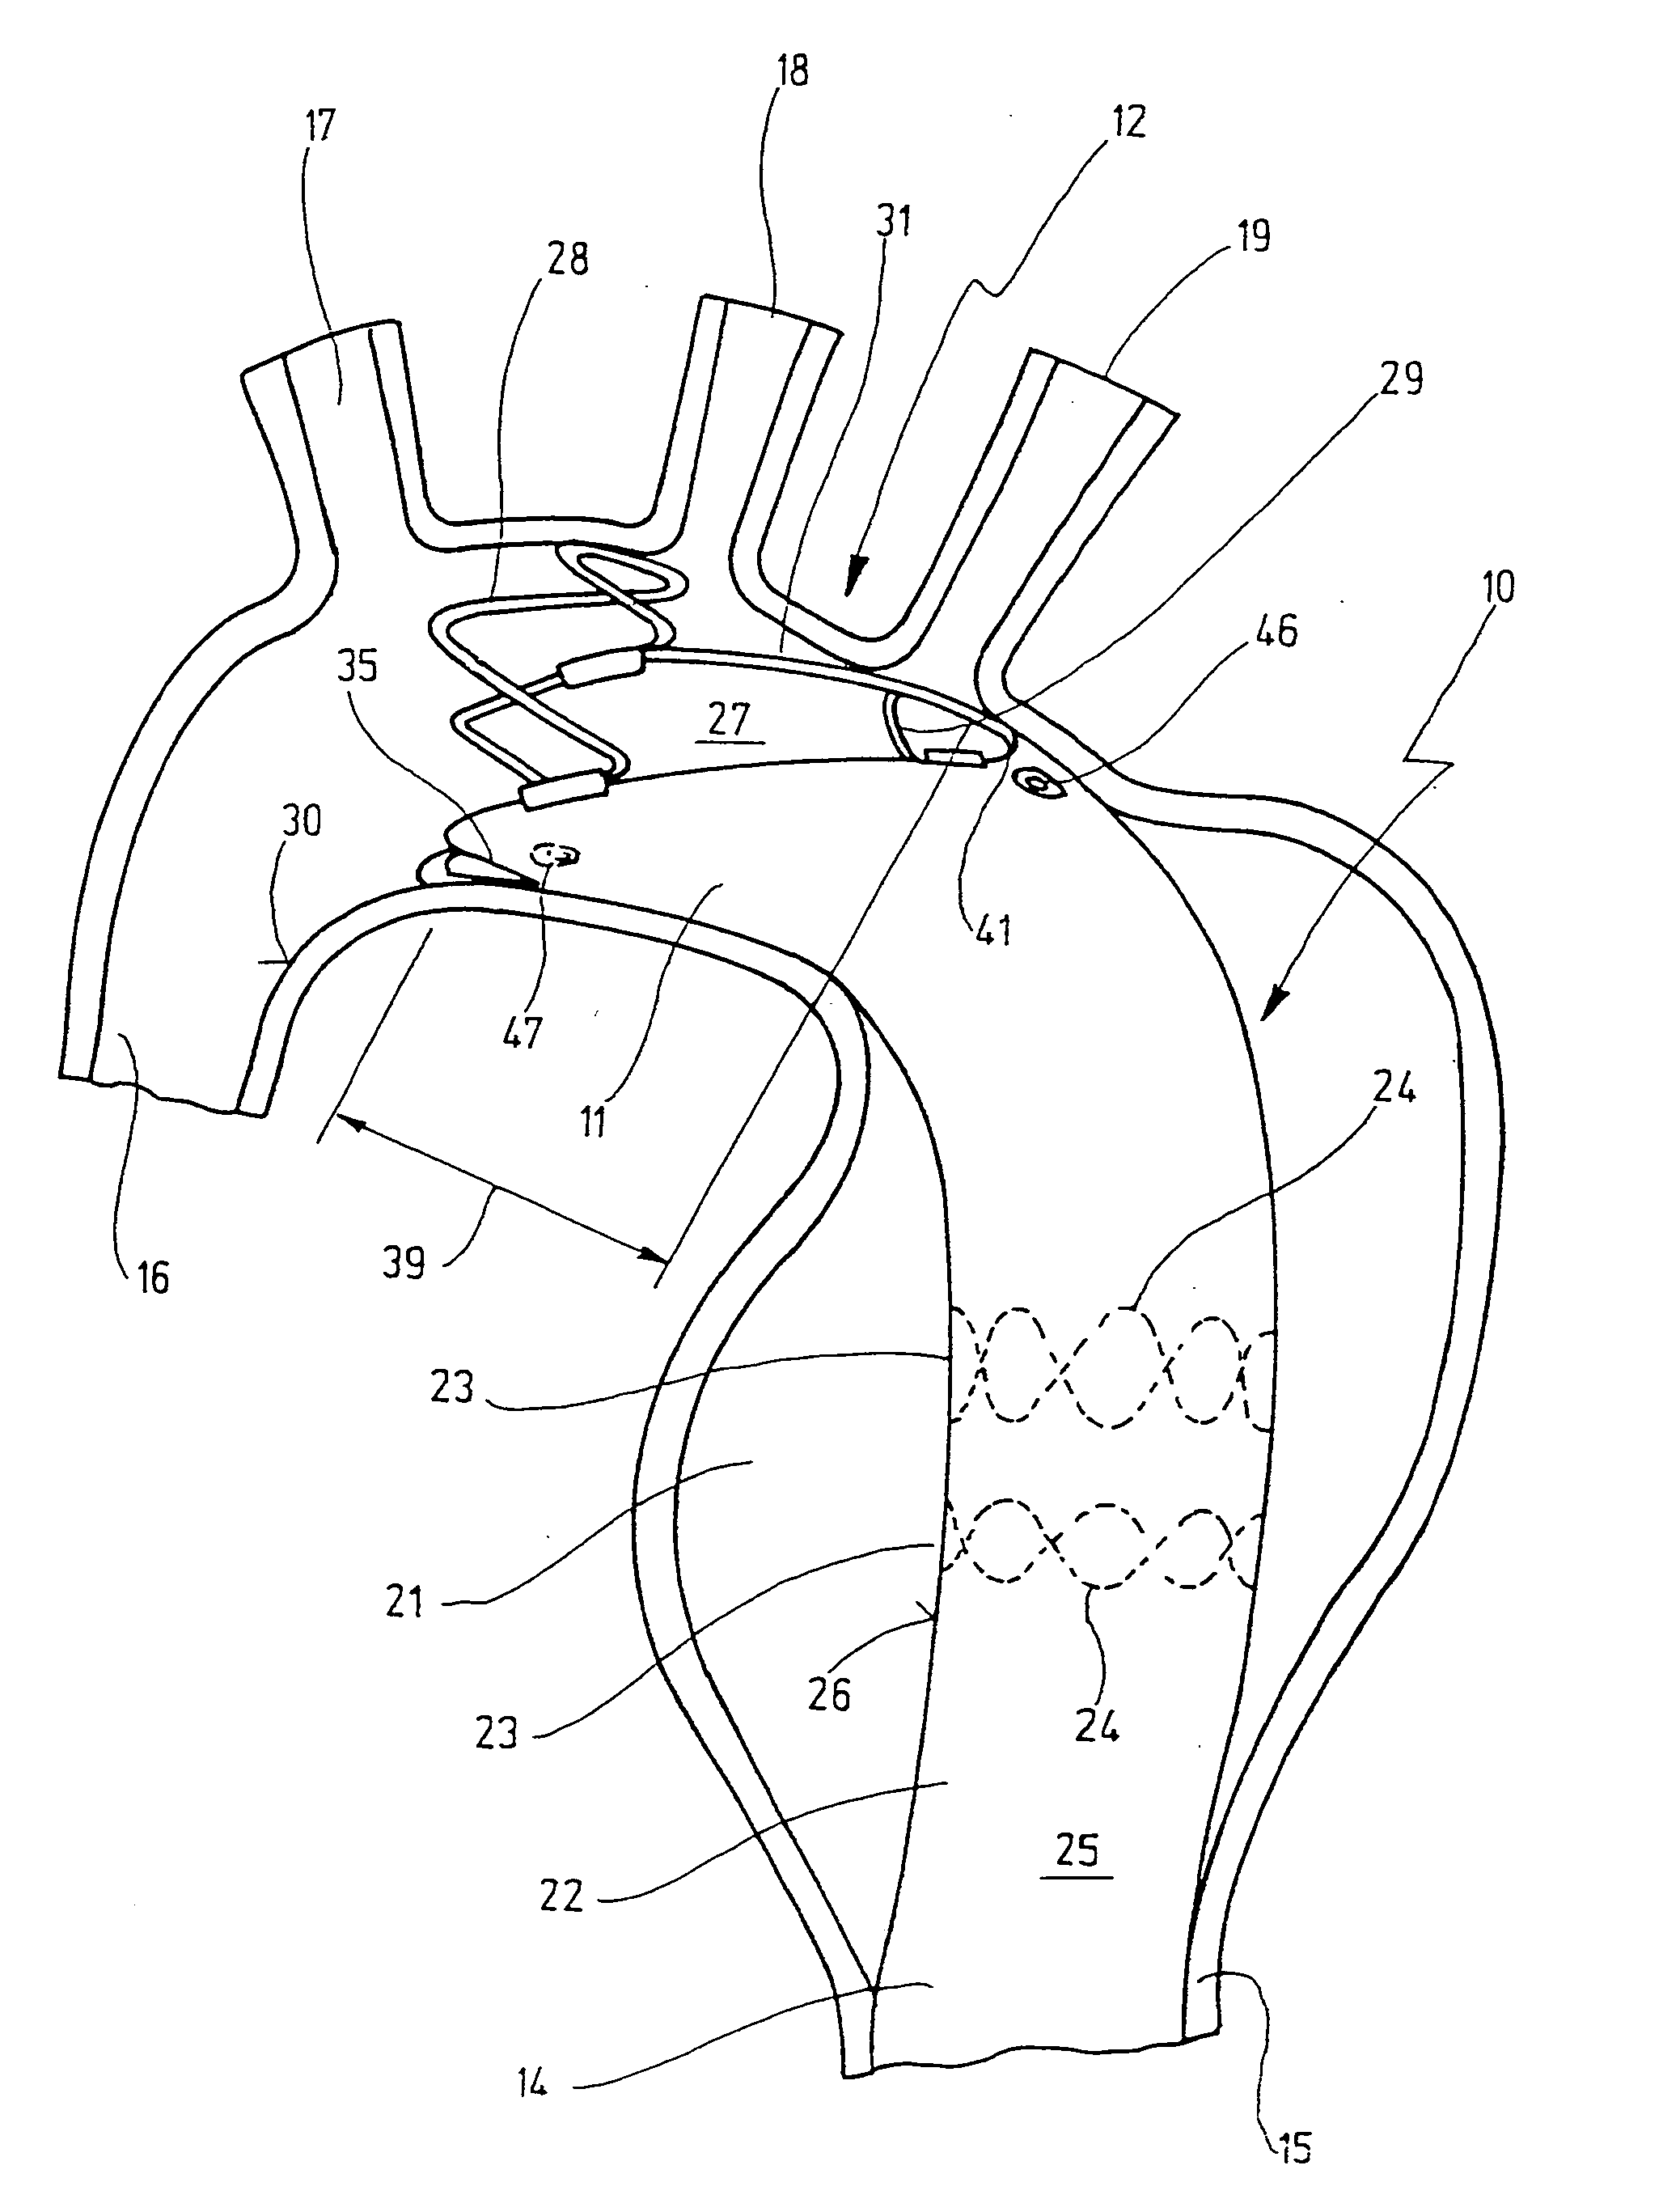 Stent for implantation in a blood vessel, especially in the region of the aortic arch